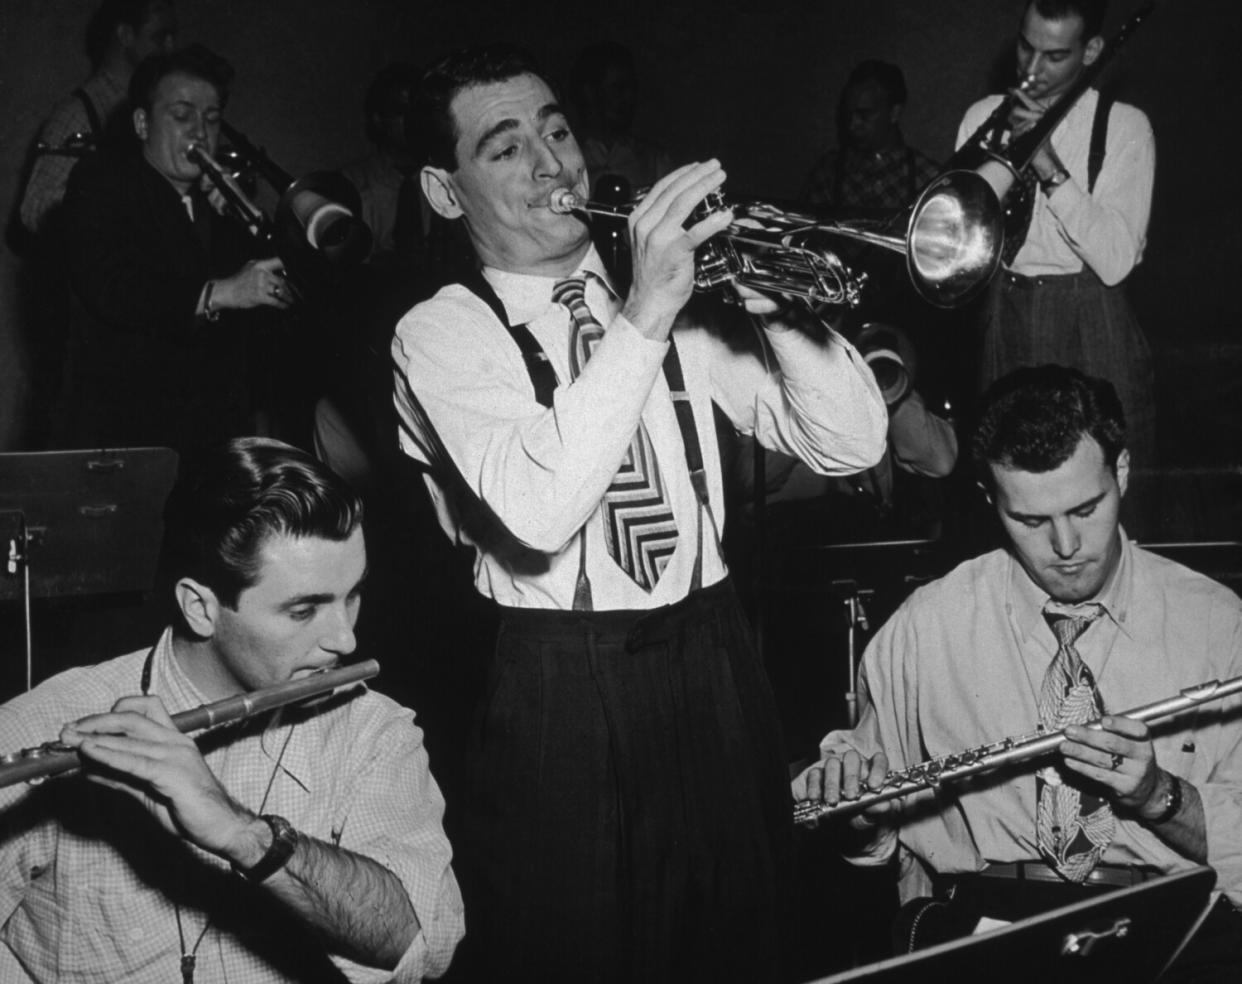 A man playing trumpet amid other musicians